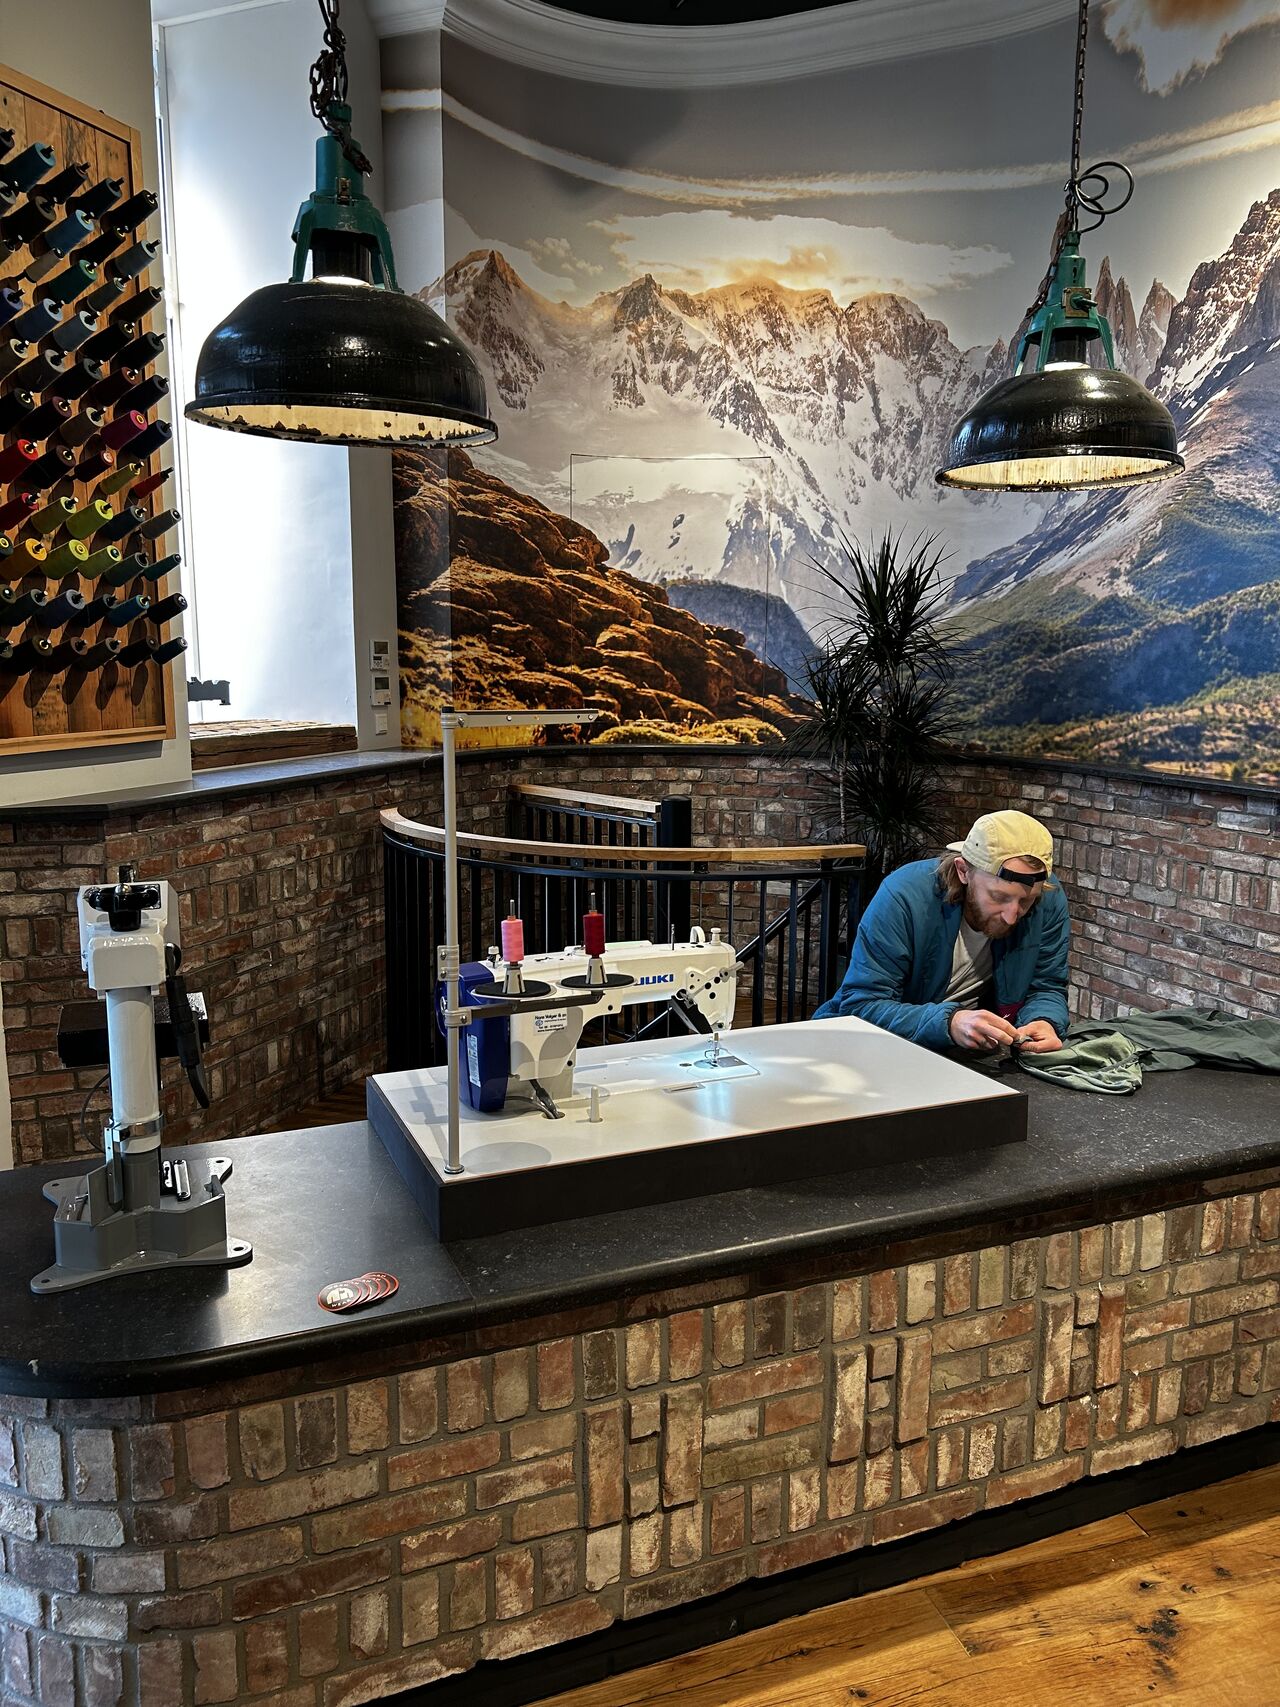 [In the picture] Patagonia opens first Dutch store – RetailDetail EU